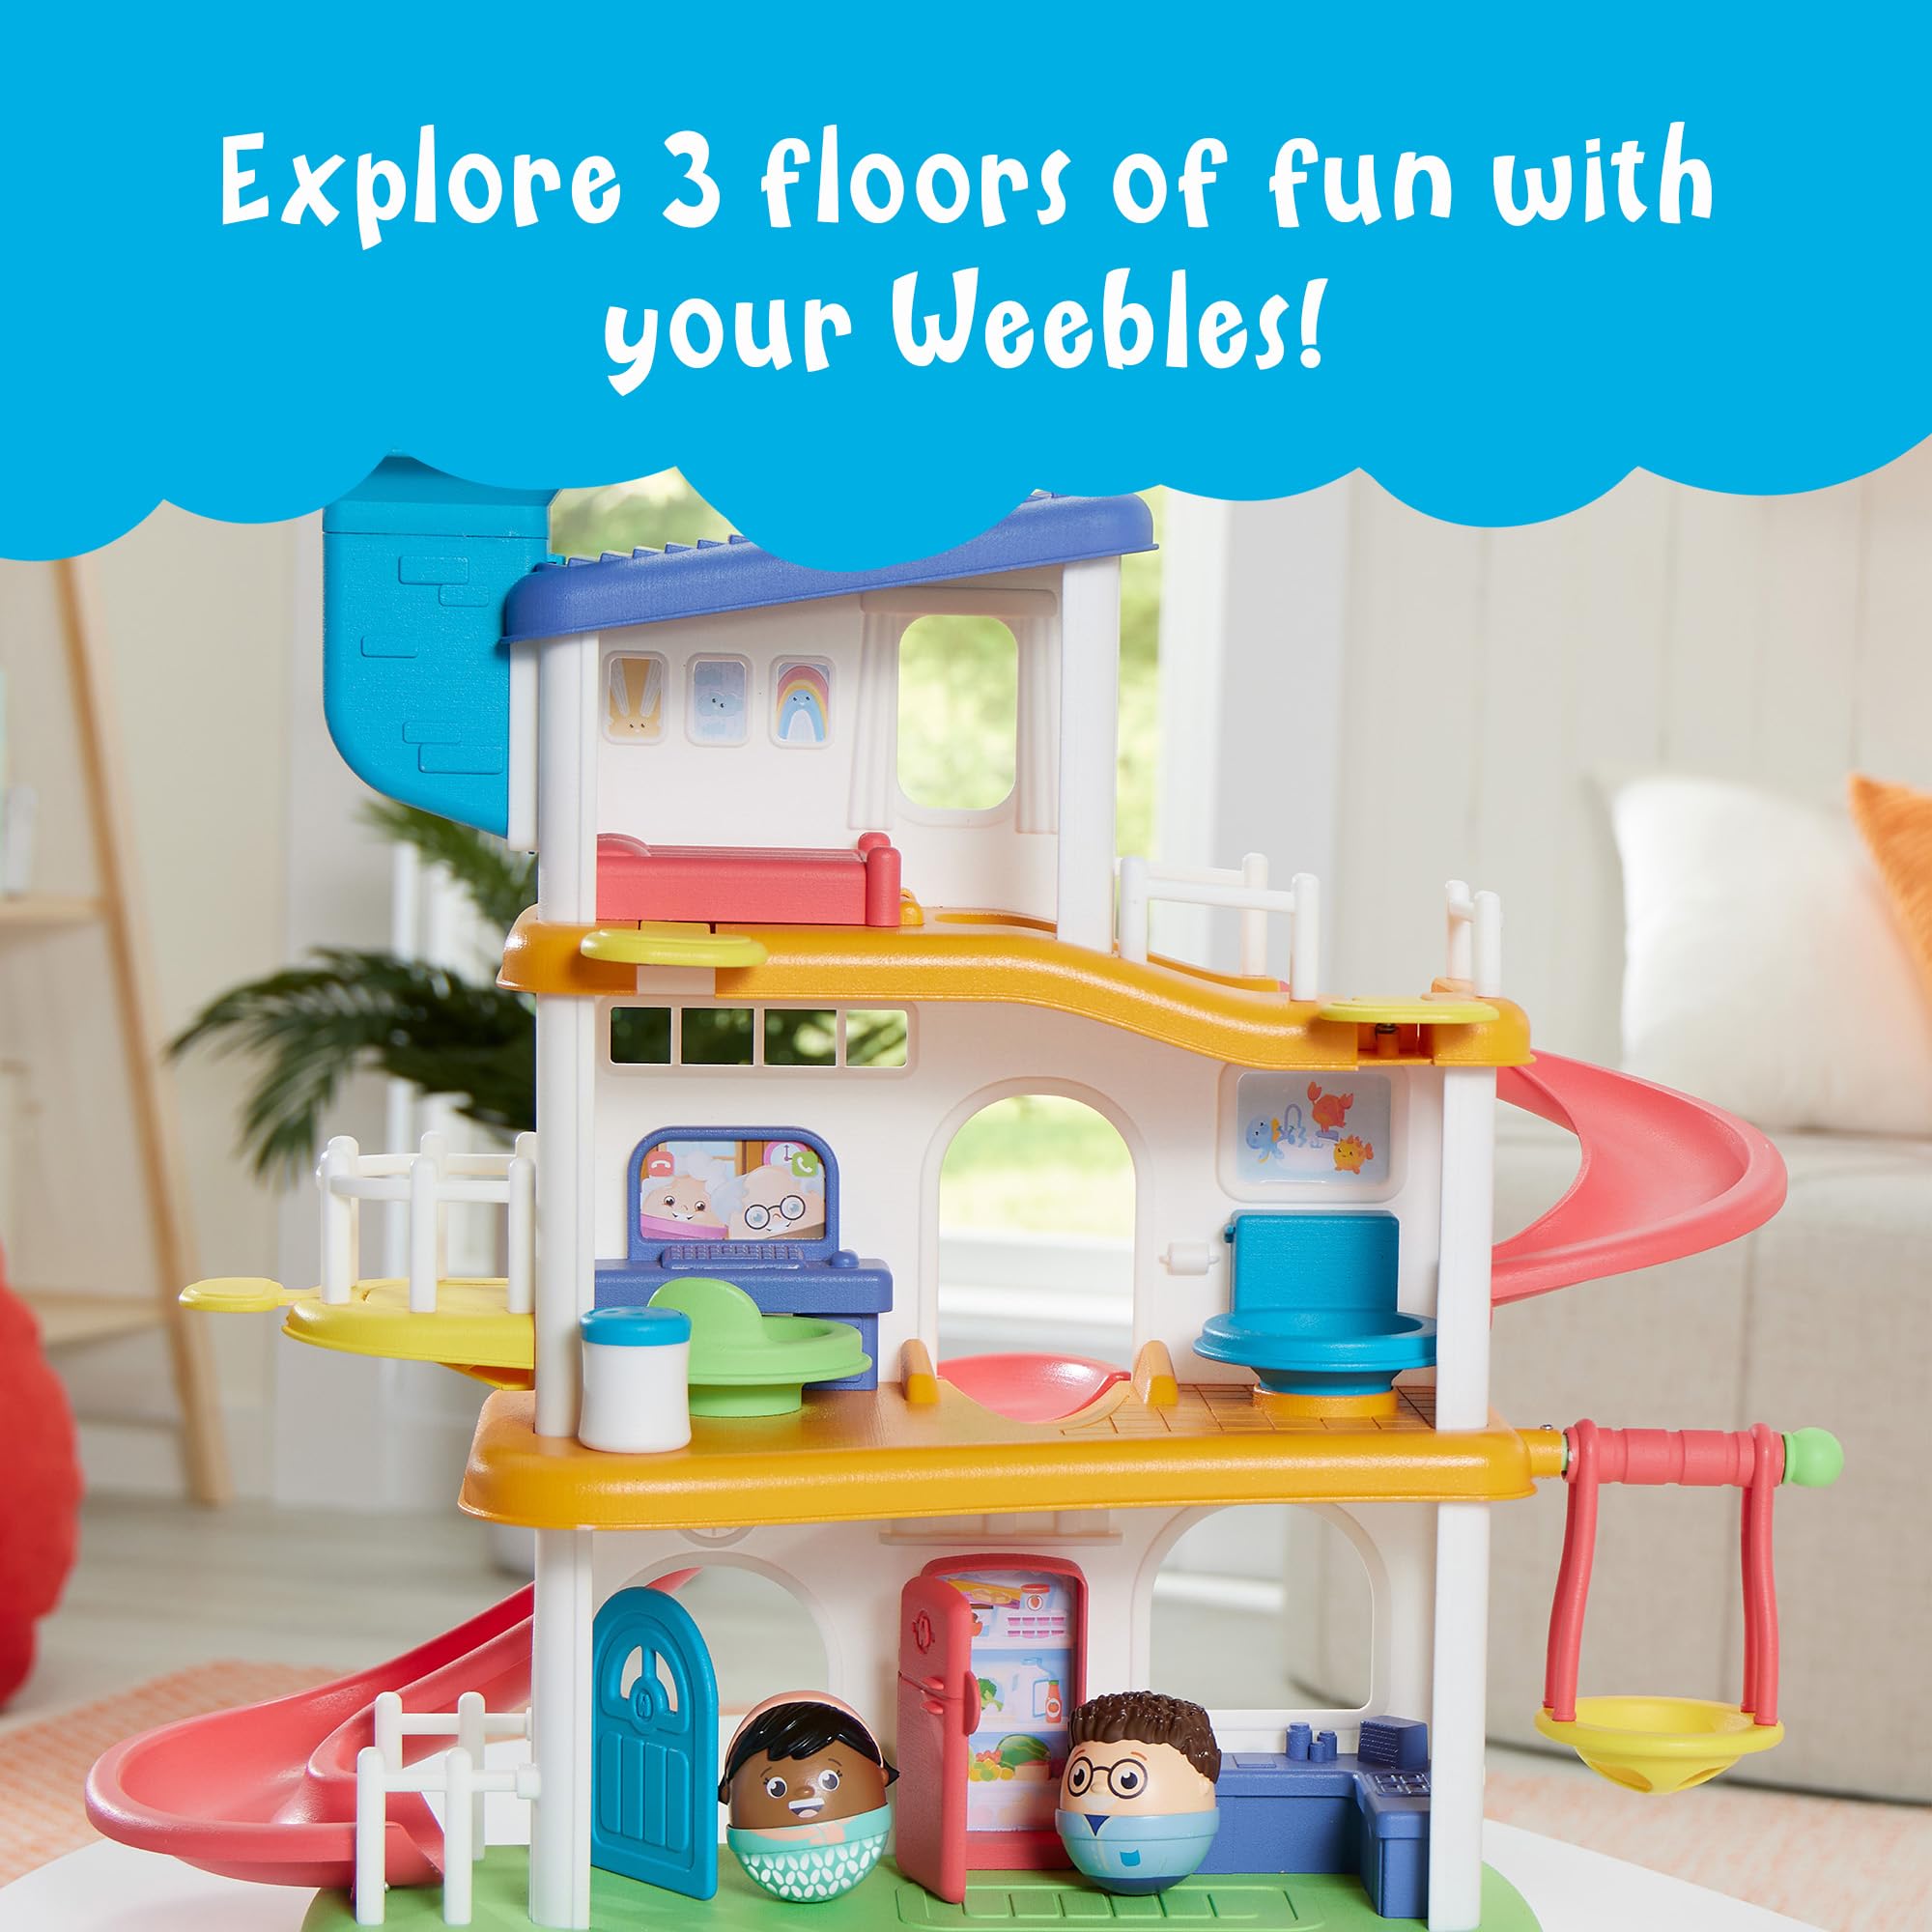 Playskool Weebles My Smart House - Weeble Wobble Preschool Toy for Toddlers Smart Speaker with Sounds + Songs 3 Floors of Imaginative Play for Ages 12 Months and Up